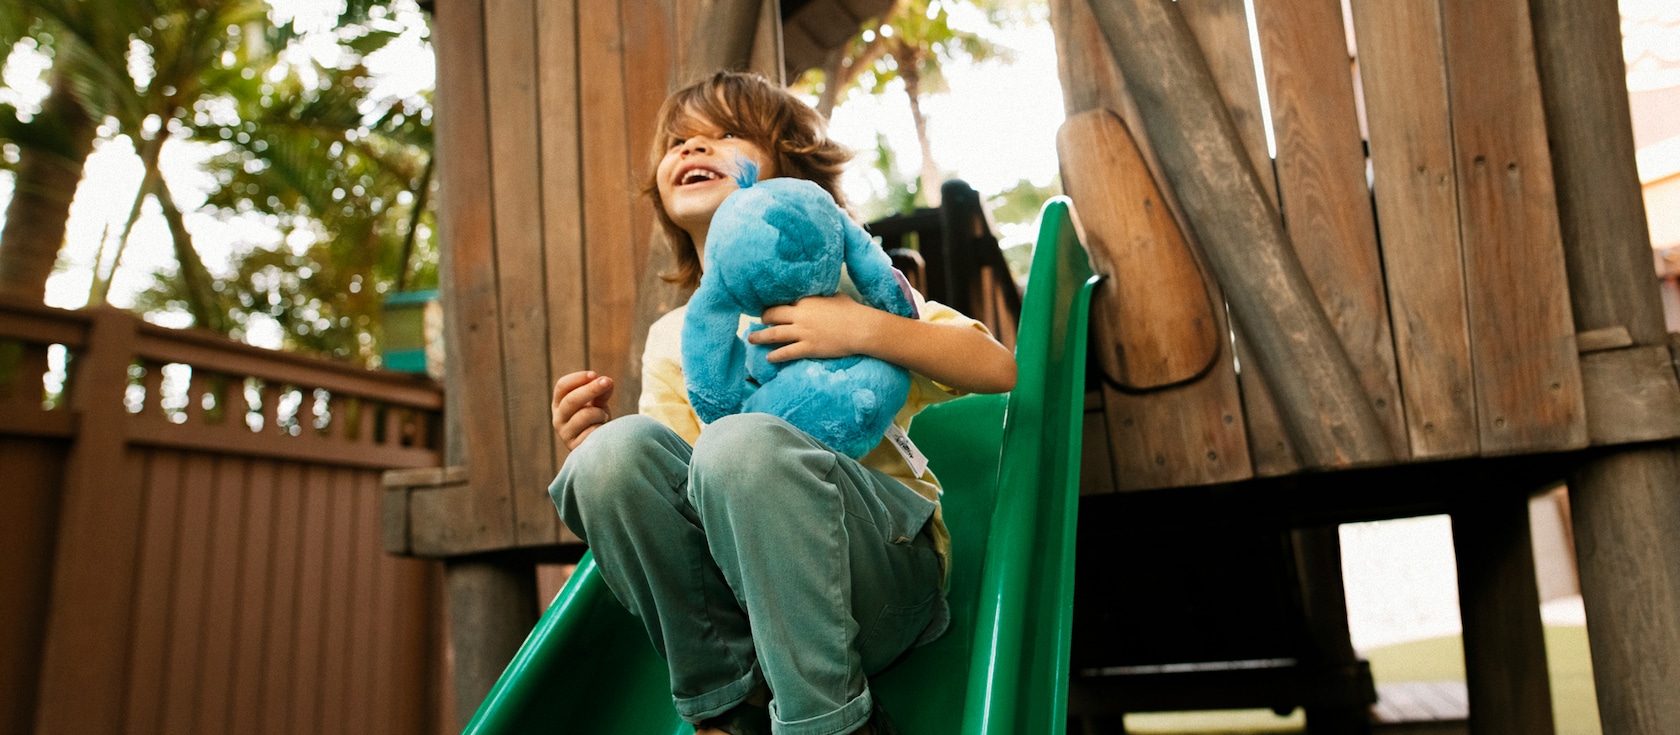 A young boy goes down a slide holding a Stitch plush